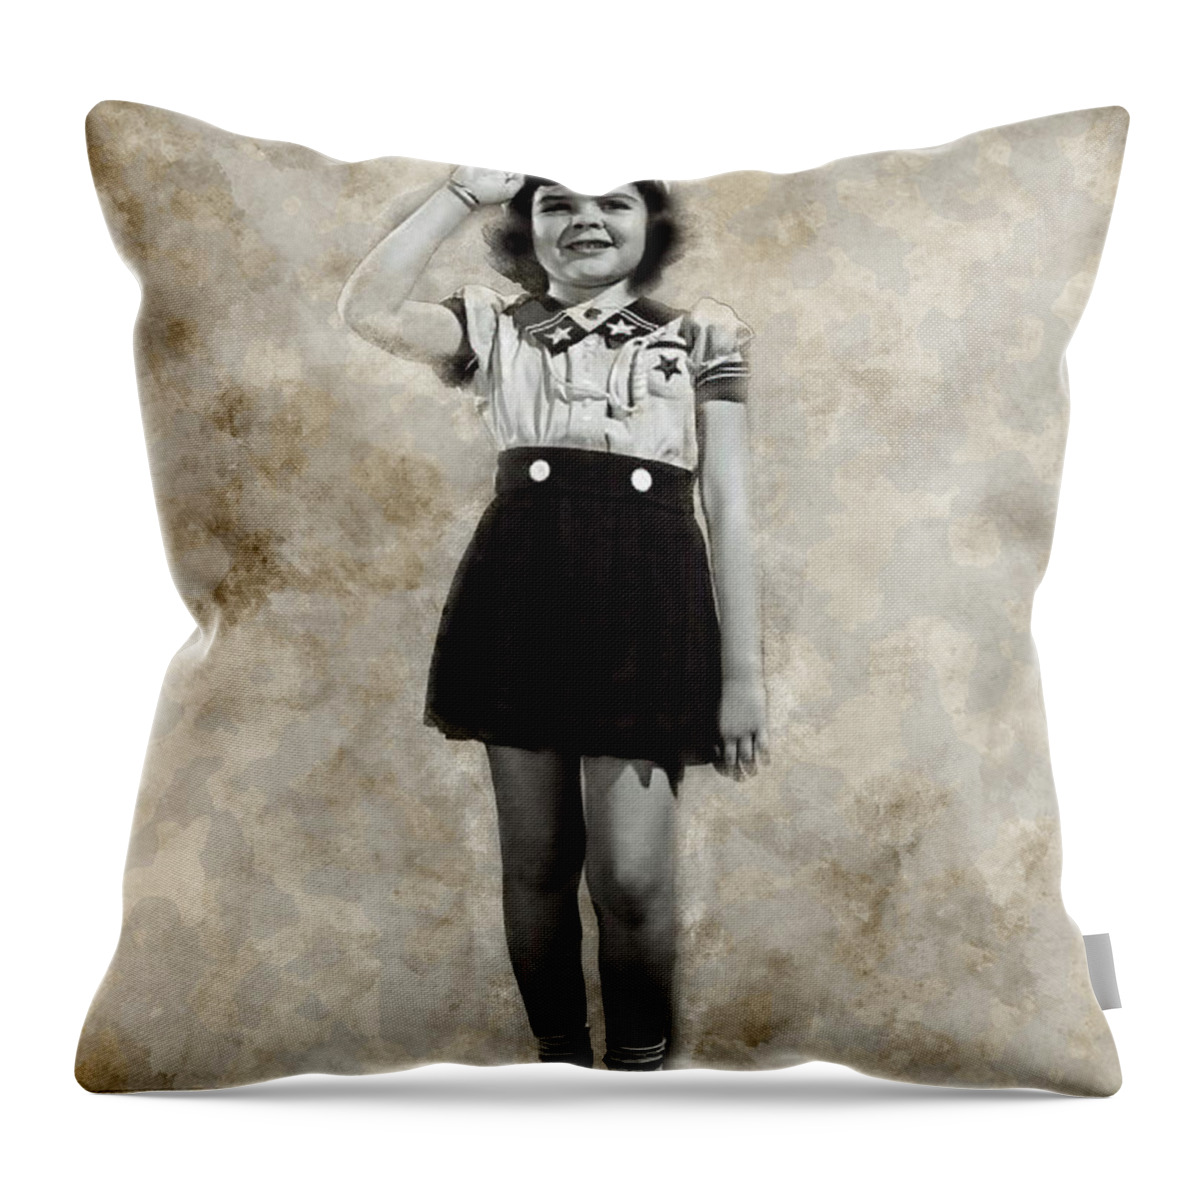 Our Gang Comedy Throw Pillow featuring the digital art Darla Hood by Pheasant Run Gallery